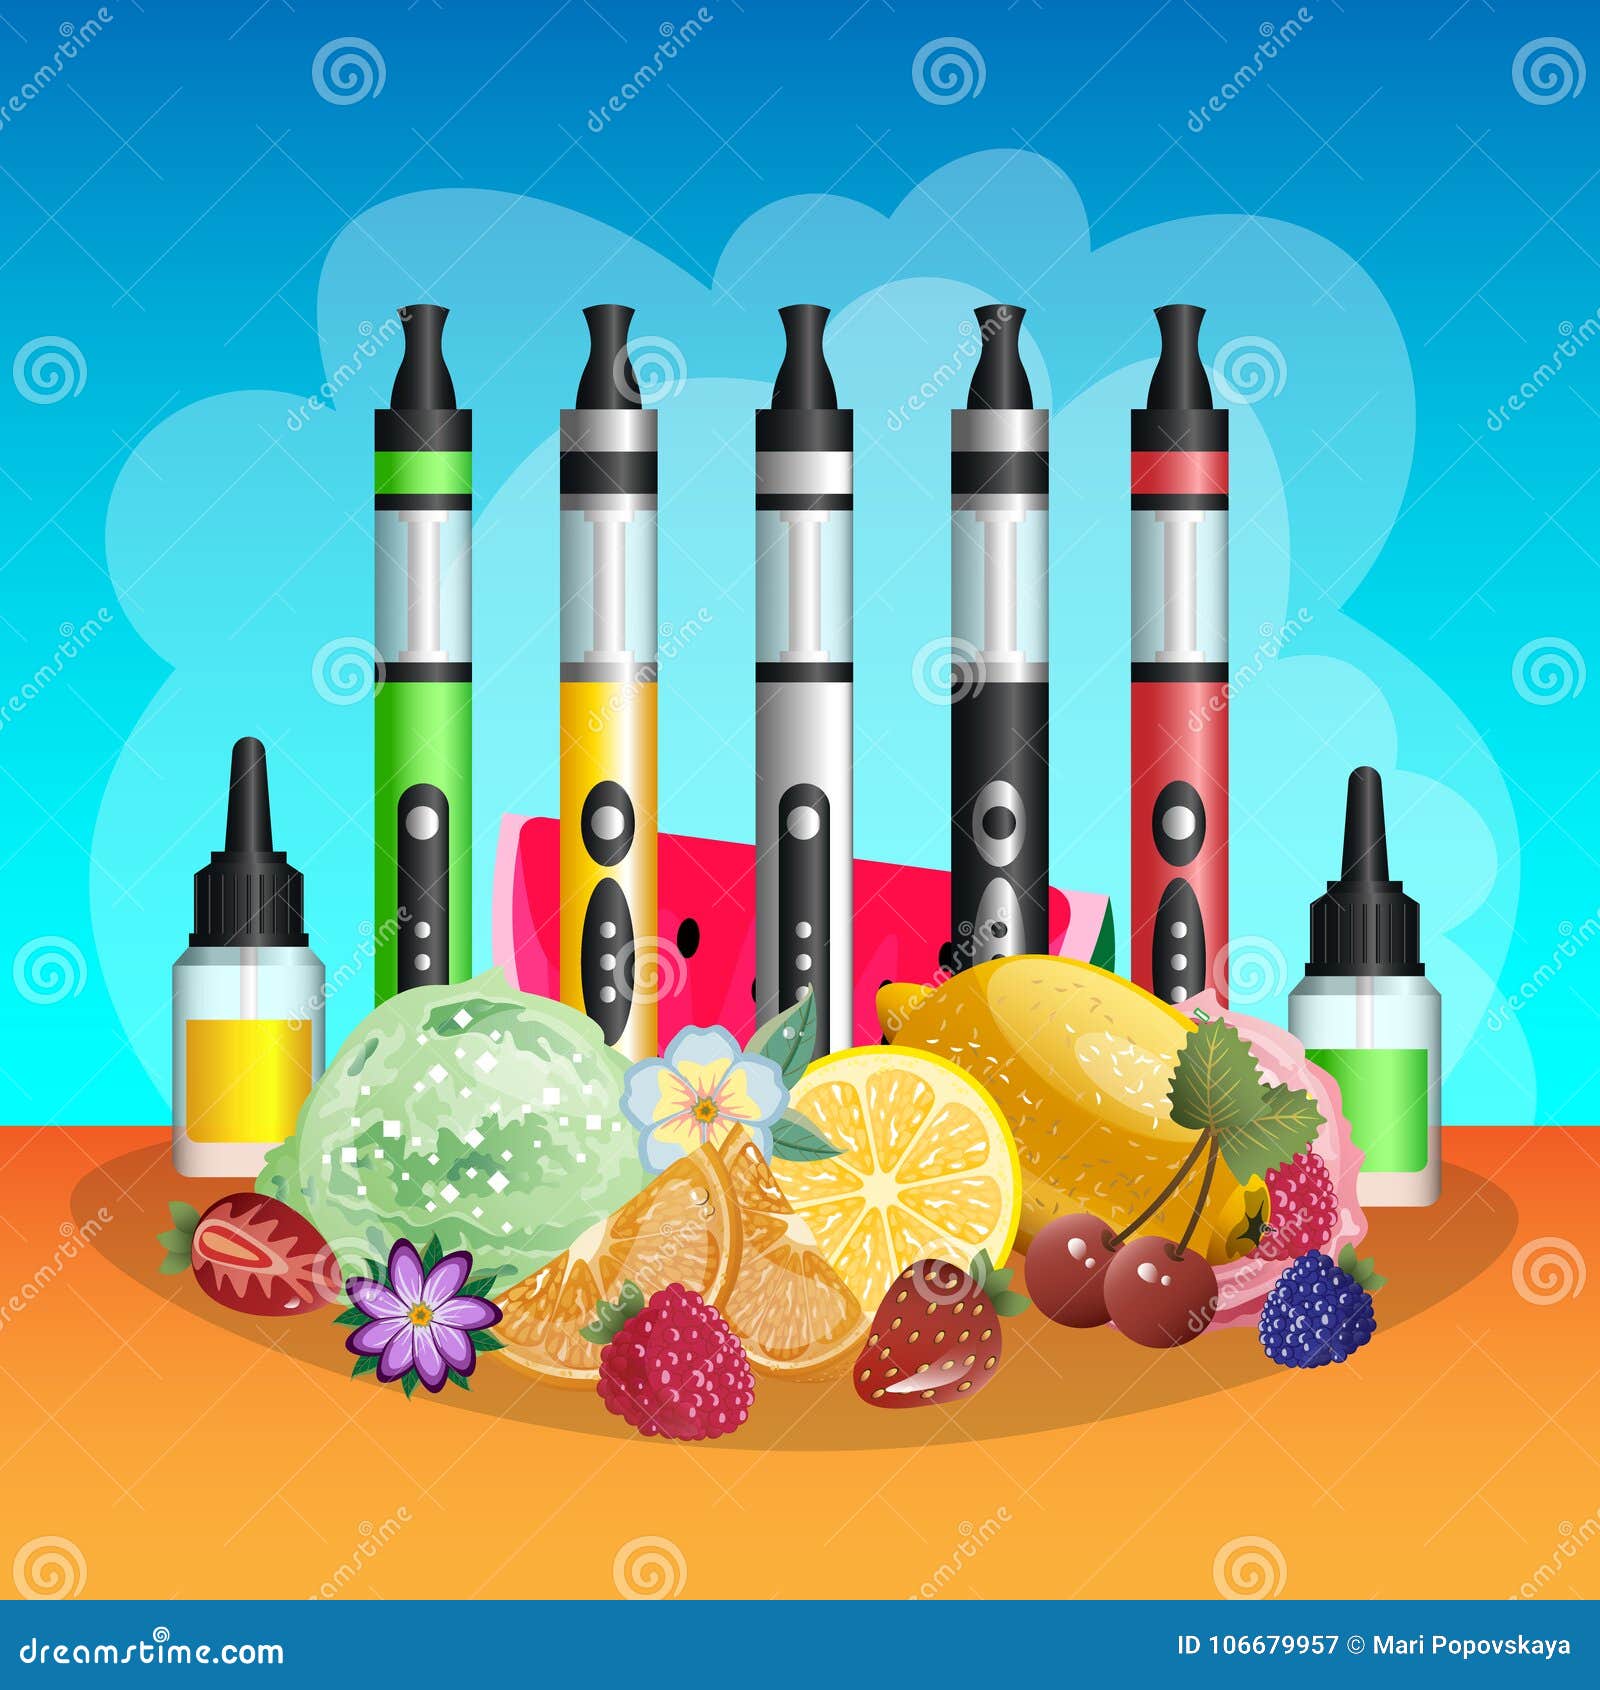 Design Concept of Exotic Smoking Usual and Electronic Stock Vector ...